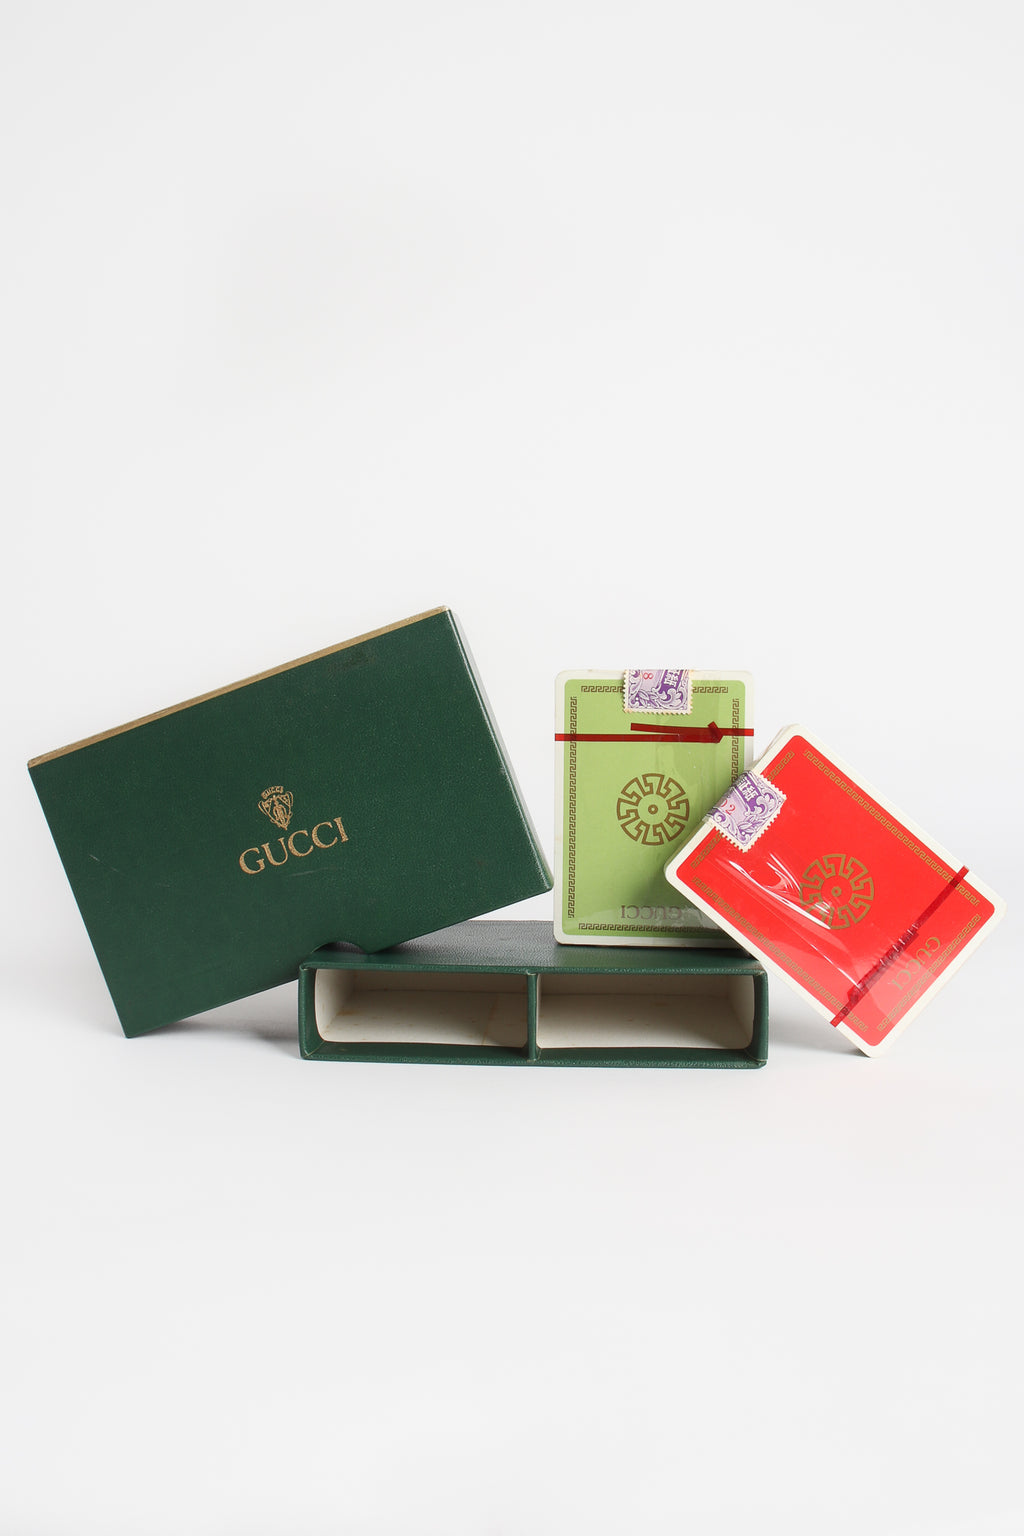 gucci playing cards Archives - High Heel Confidential